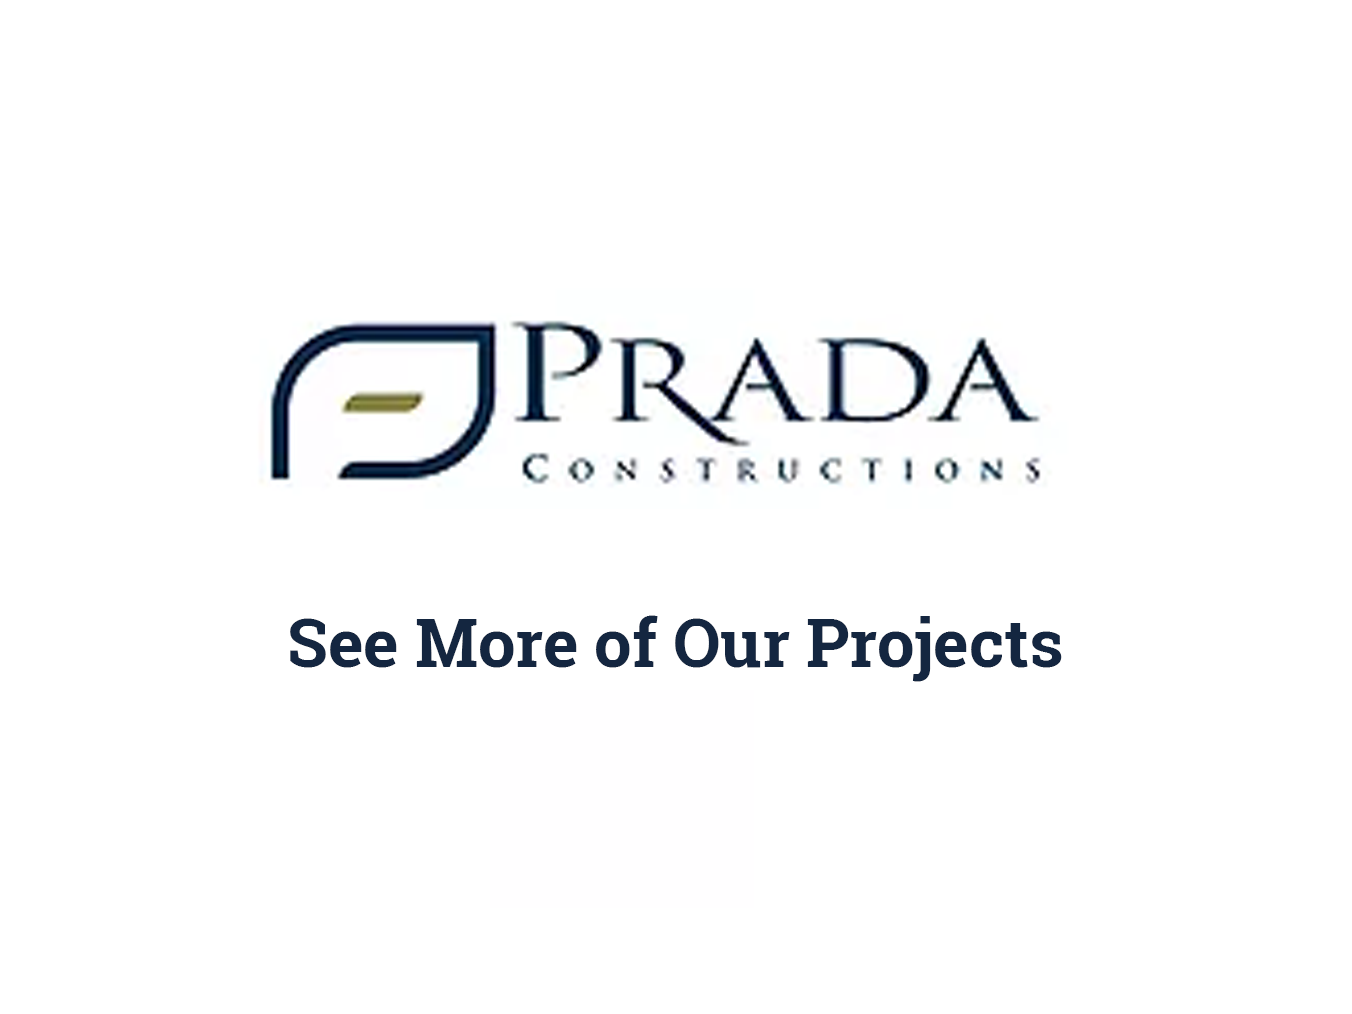 Prada Constructions Logo, see more Beachfront Painting projects